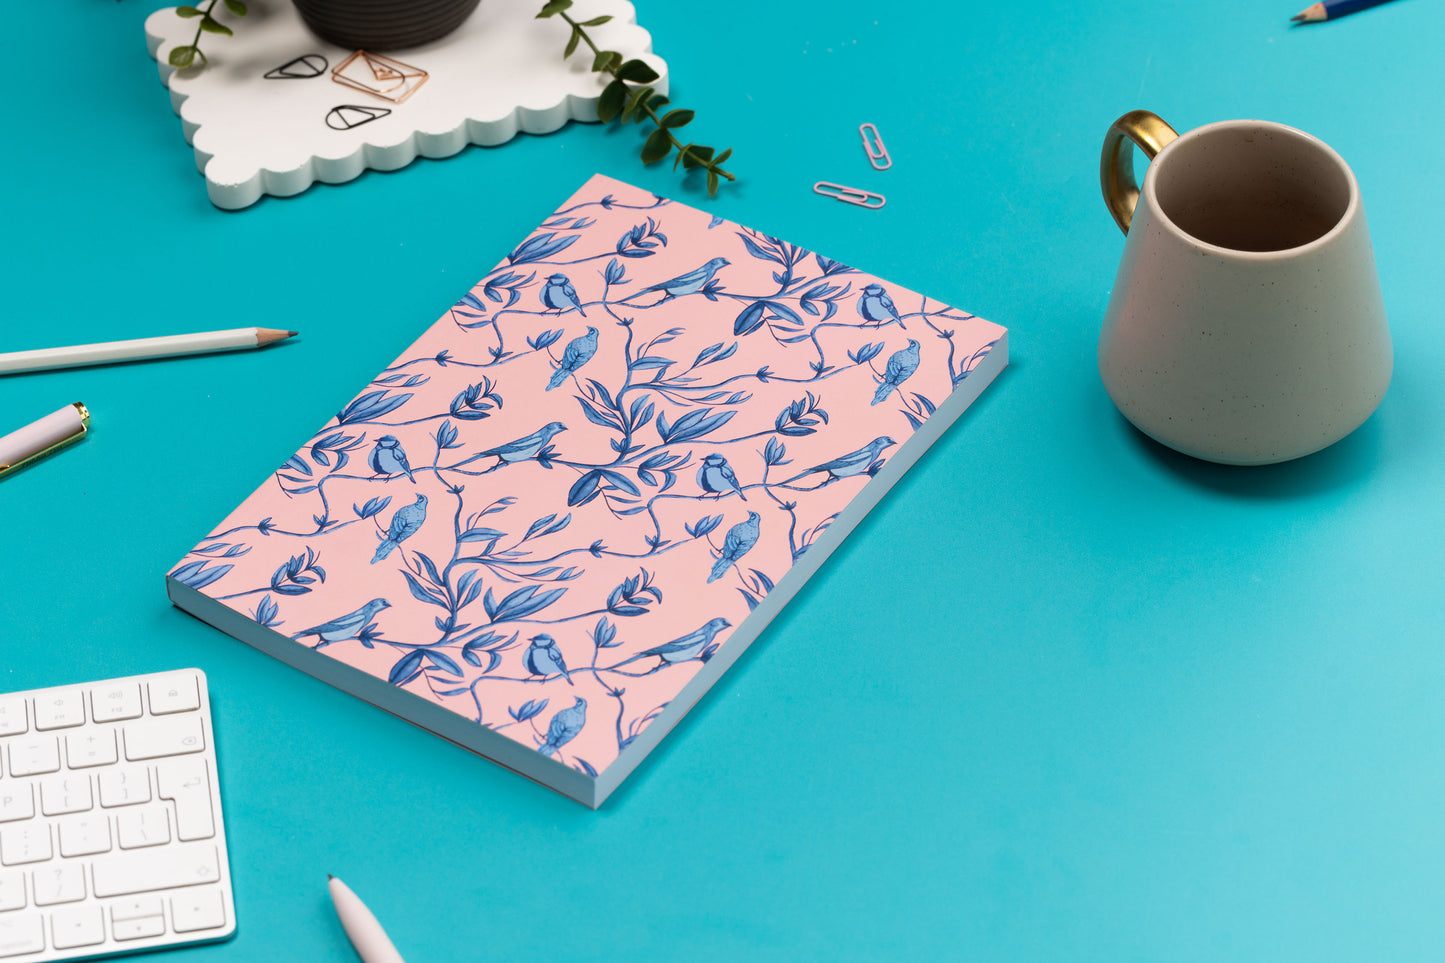 Brighton Birds B5 Dot Grid Notebook is central, on a teal desk with a white keyboard, grey mug, scattered pens and a small plant around it.  